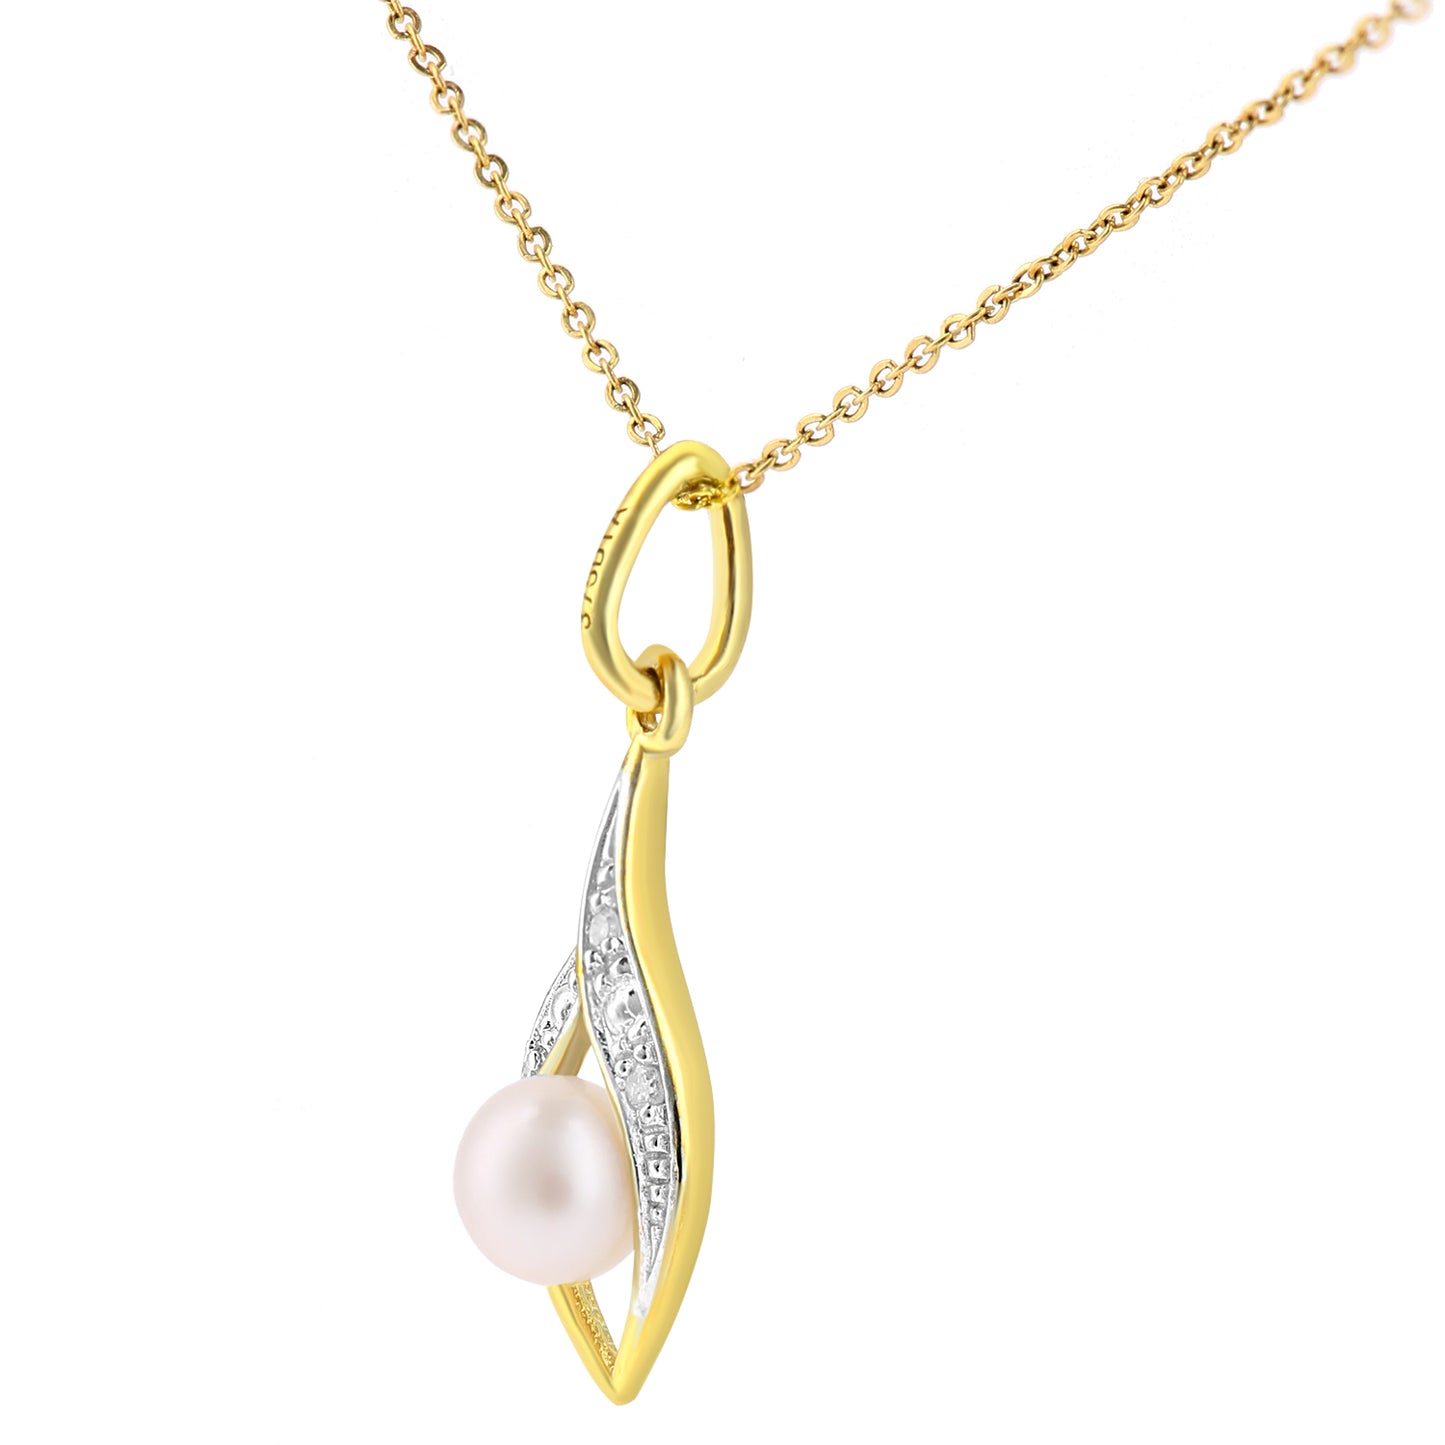 9ct Gold  2pts Diamond Pearl 5mm Almond Pea Pod Necklace 18" - PP0AXL4463YPRL